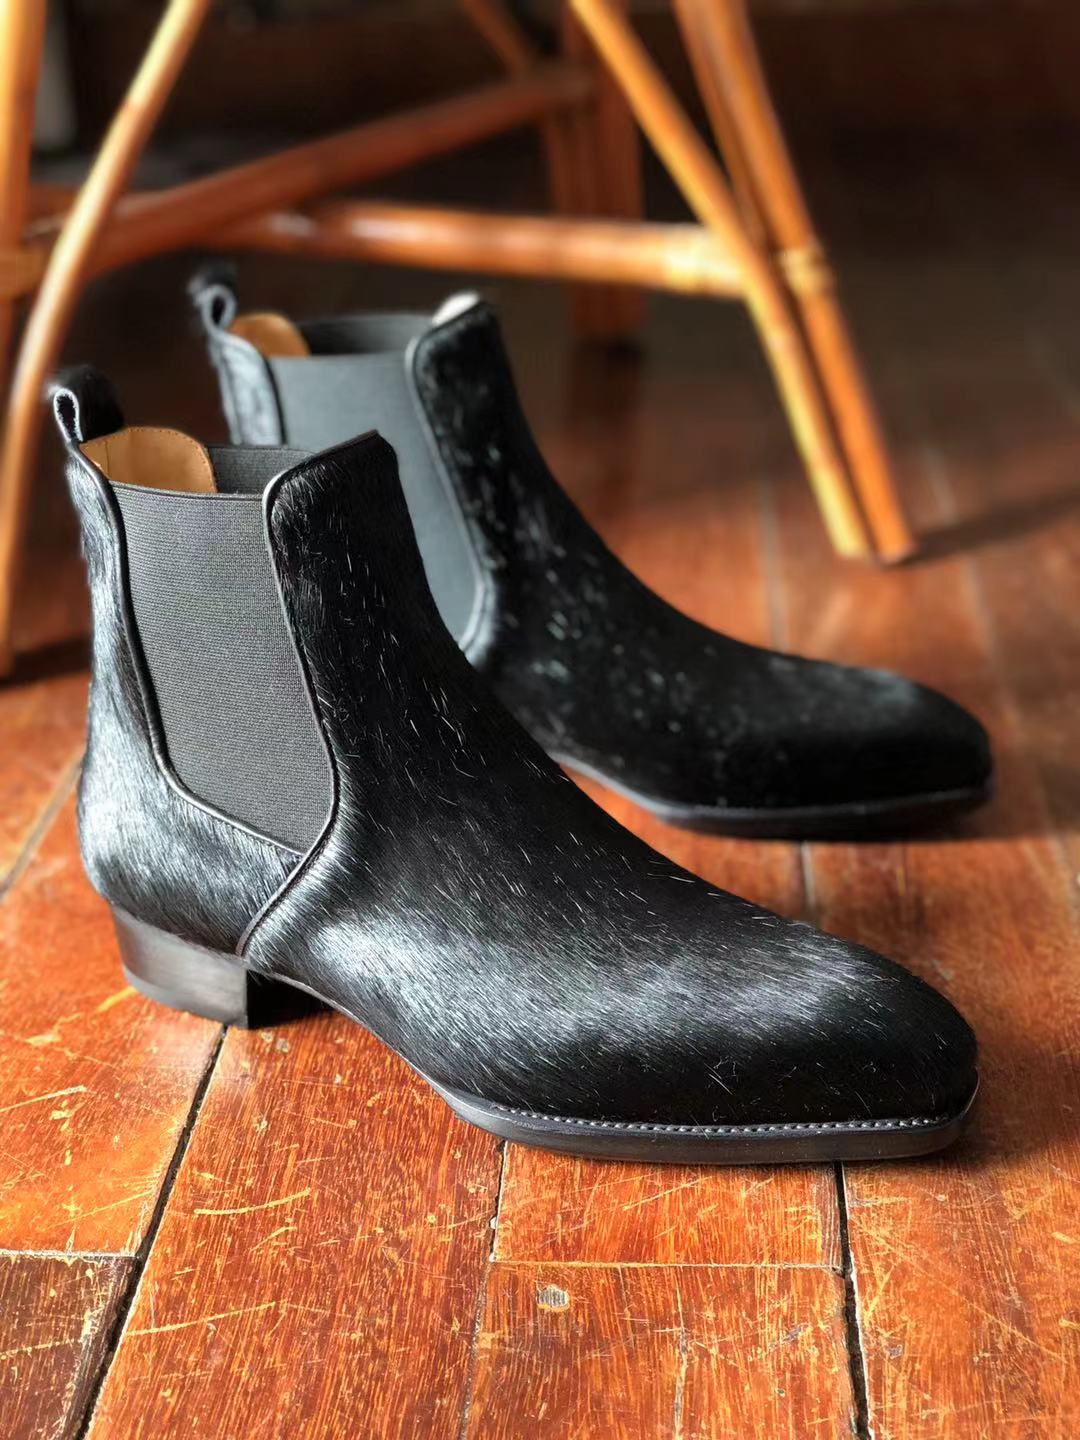 Fiddle-Back/Beveled Waist High Quality Leather Men's Chelsea Boot All For Me Today